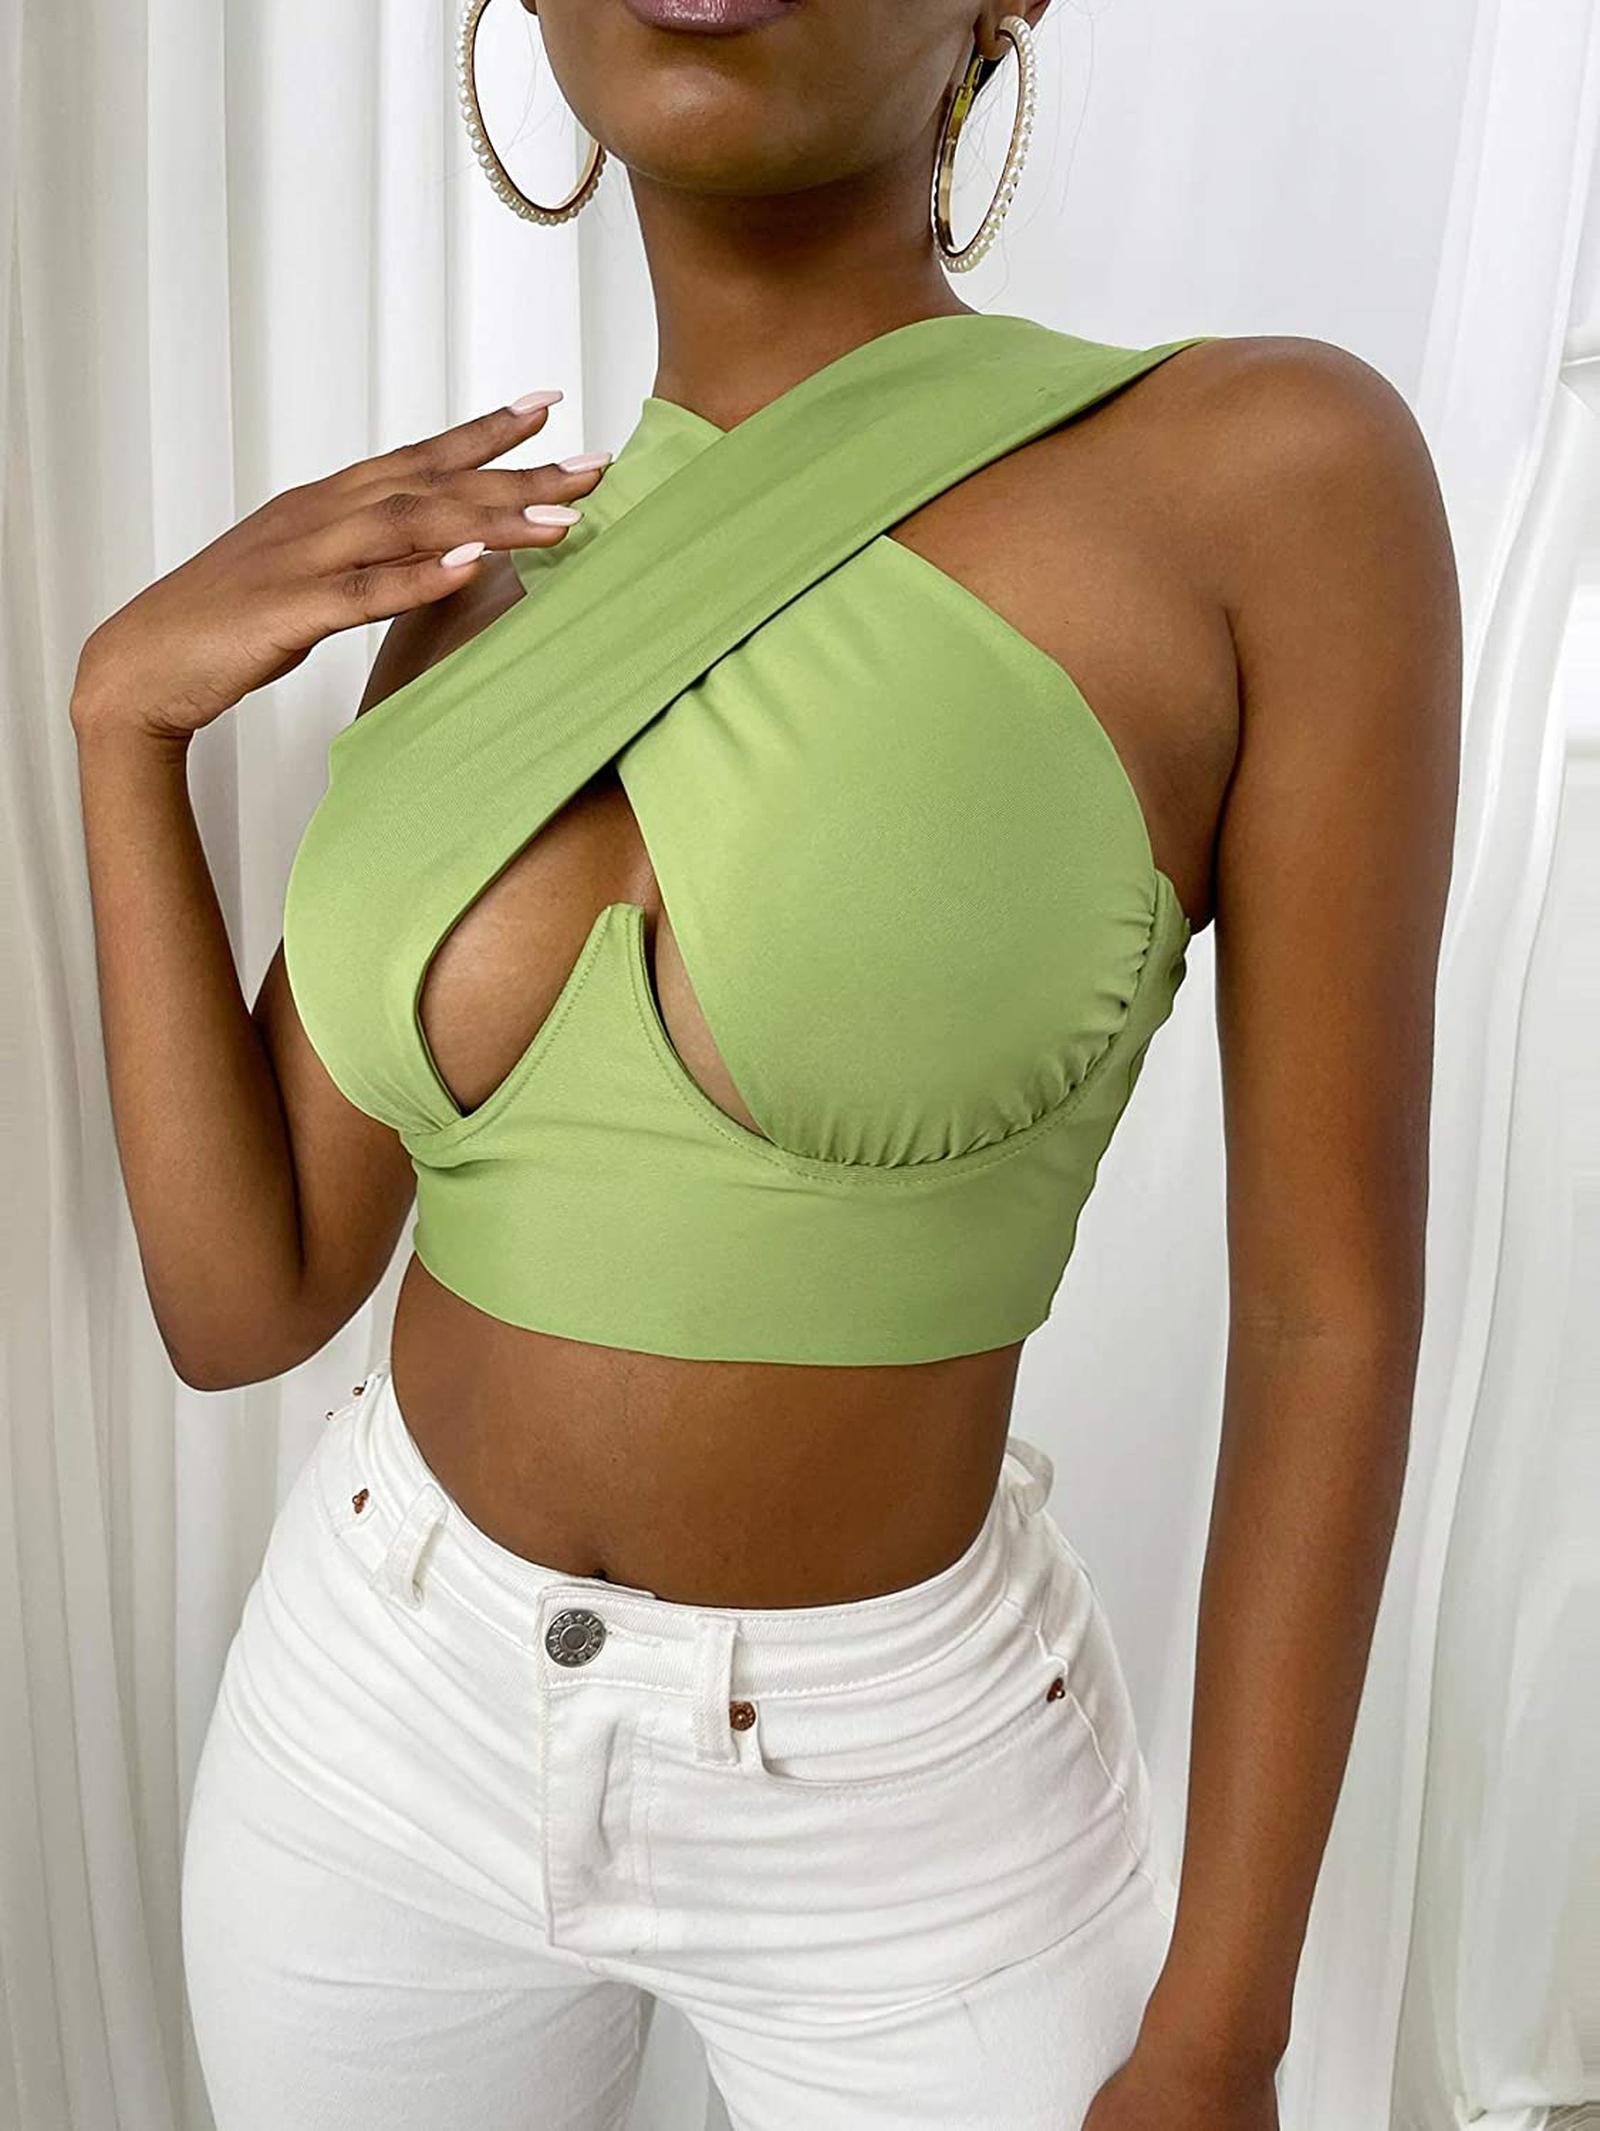 

Women' Criss Cross Tank Tops Sexy Sleeveless Solid Color Cutout Front Crop Top Party Club Streetwear Summer Lady Bustier Camis, As pic